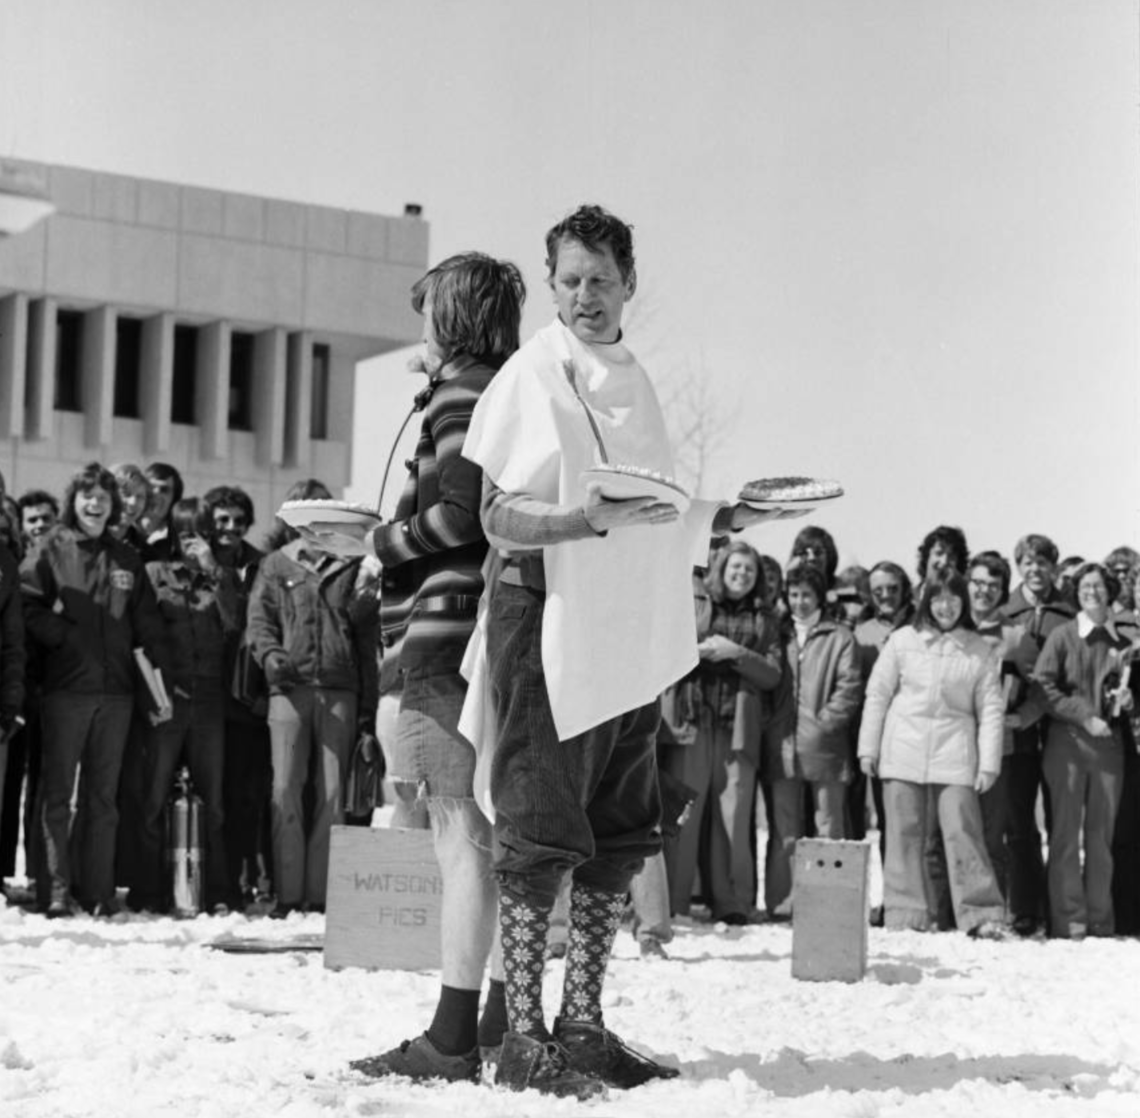 A.W.R. Carrothers, president of the University of Calgary, preparing to have a pie duel with the Students’ Union president.